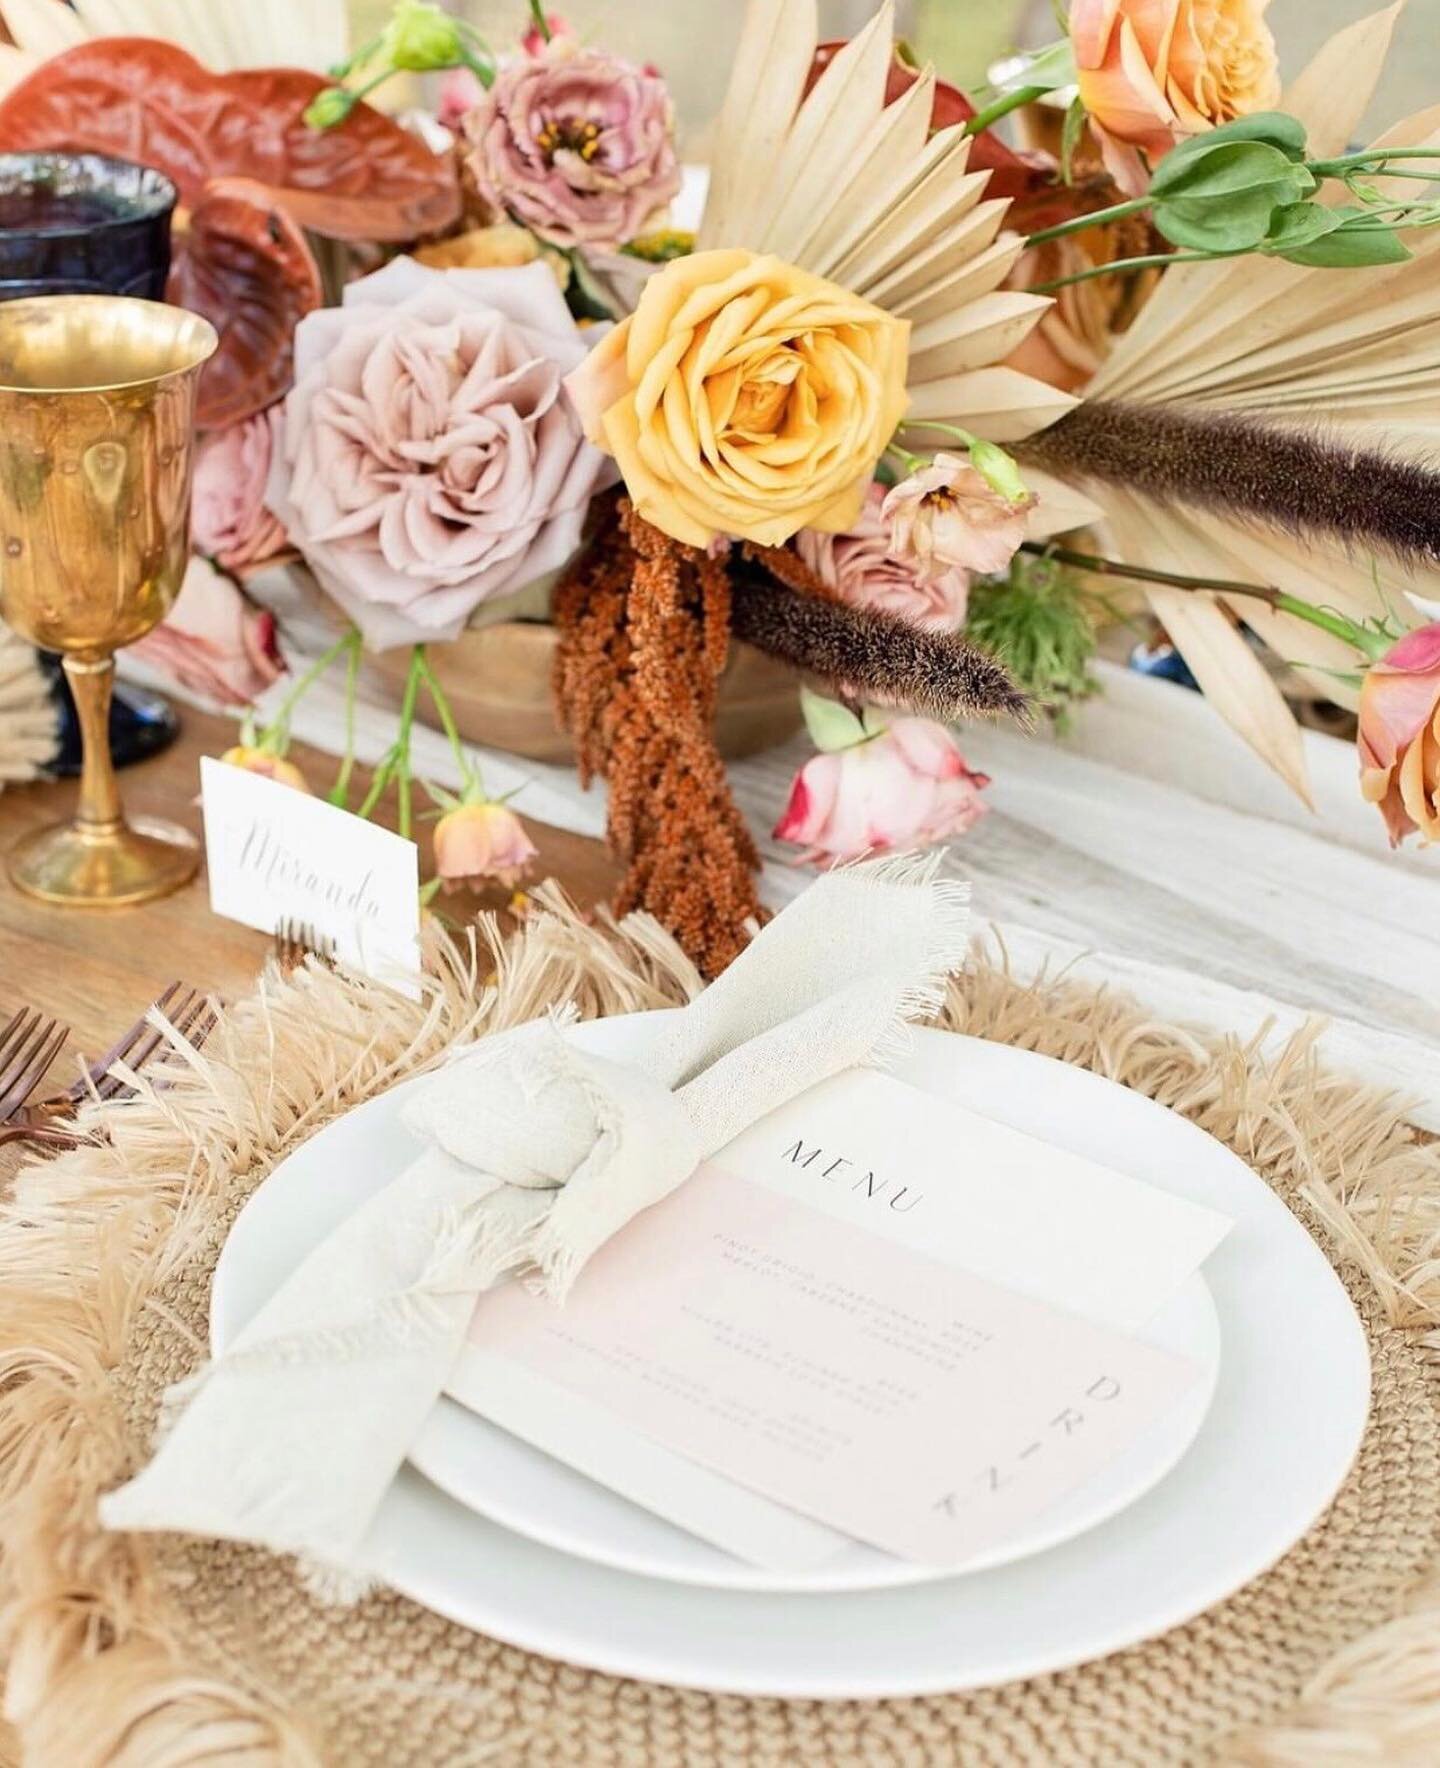 Nothing better than these boho fall vibes! 🍁 You&rsquo;ll definitely be seeing more of this gorgeous tablescape! 😍
I can&rsquo;t believe it&rsquo;s October! Whooo! T-8 weeks until baby W makes an appearance (hopefully!)
.
.
Amazing vendor team:
Pho